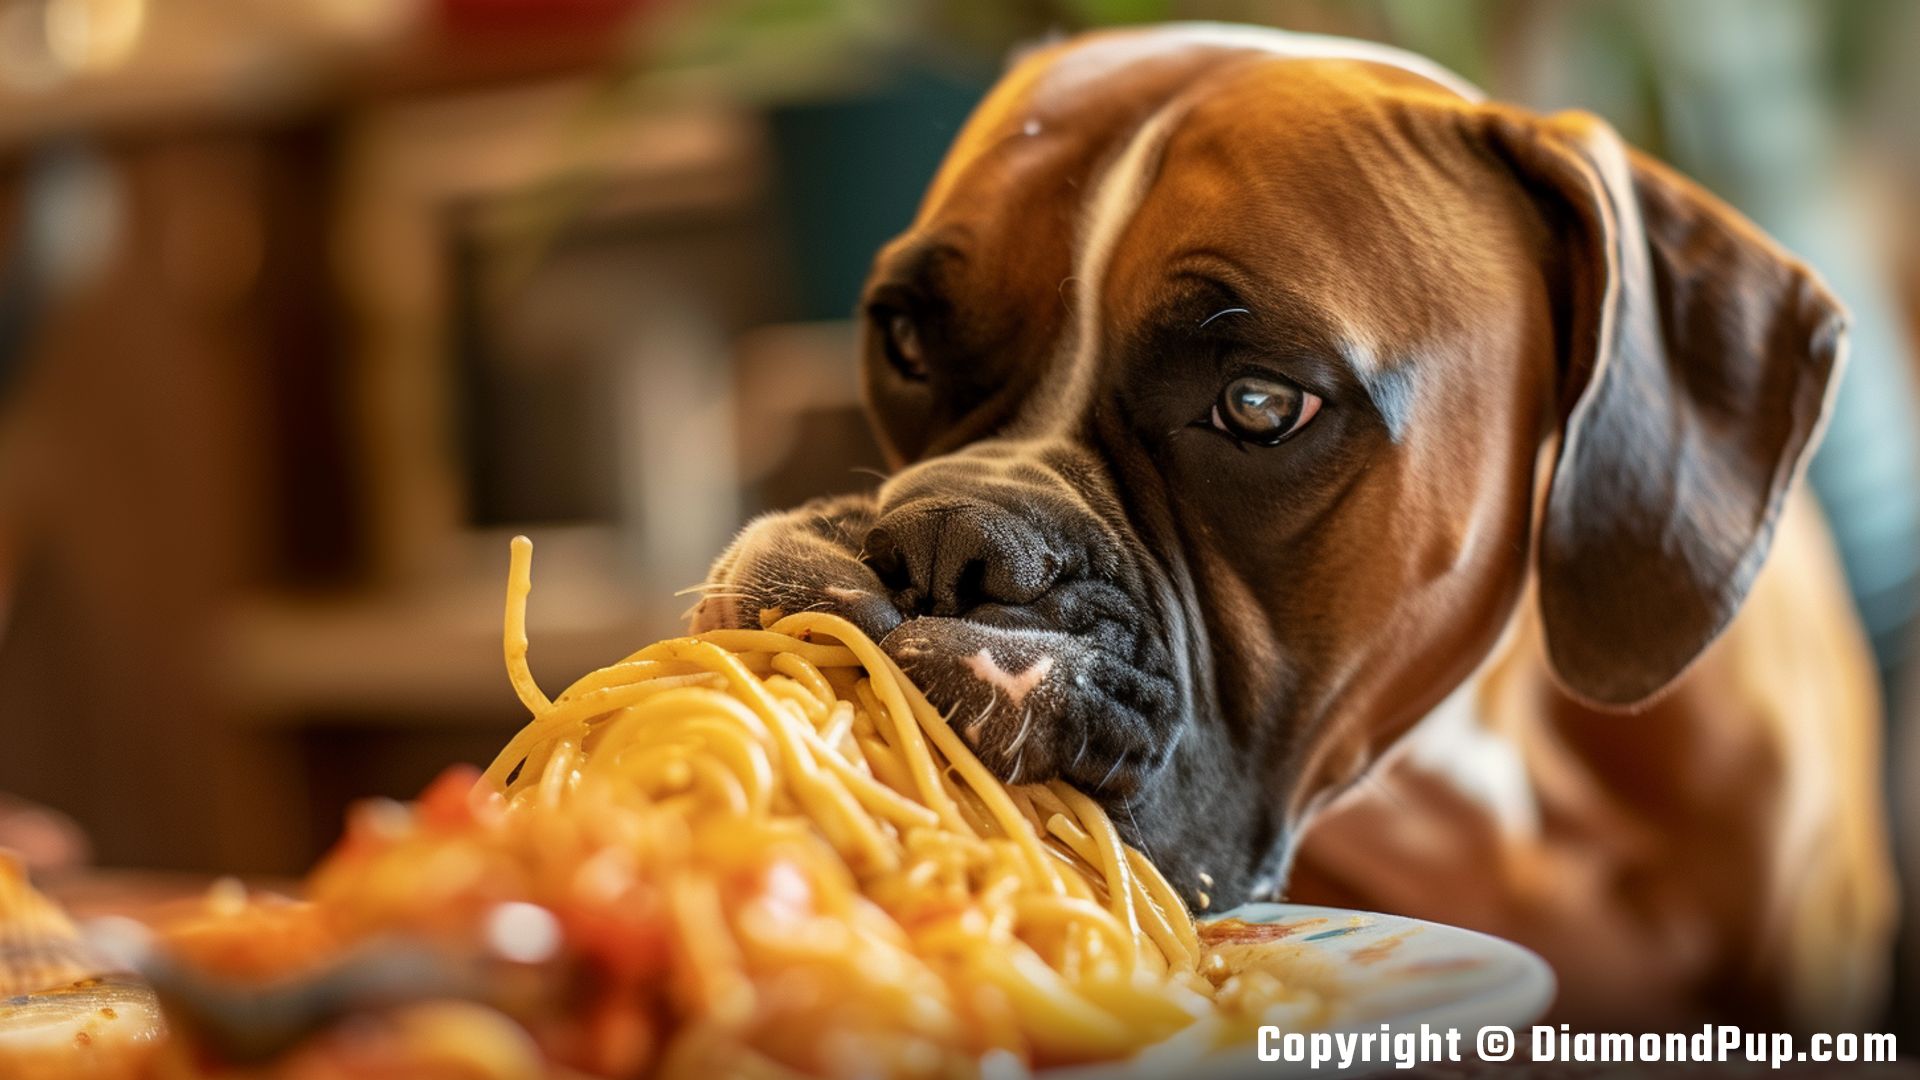 Image of an Adorable Boxer Snacking on Pasta